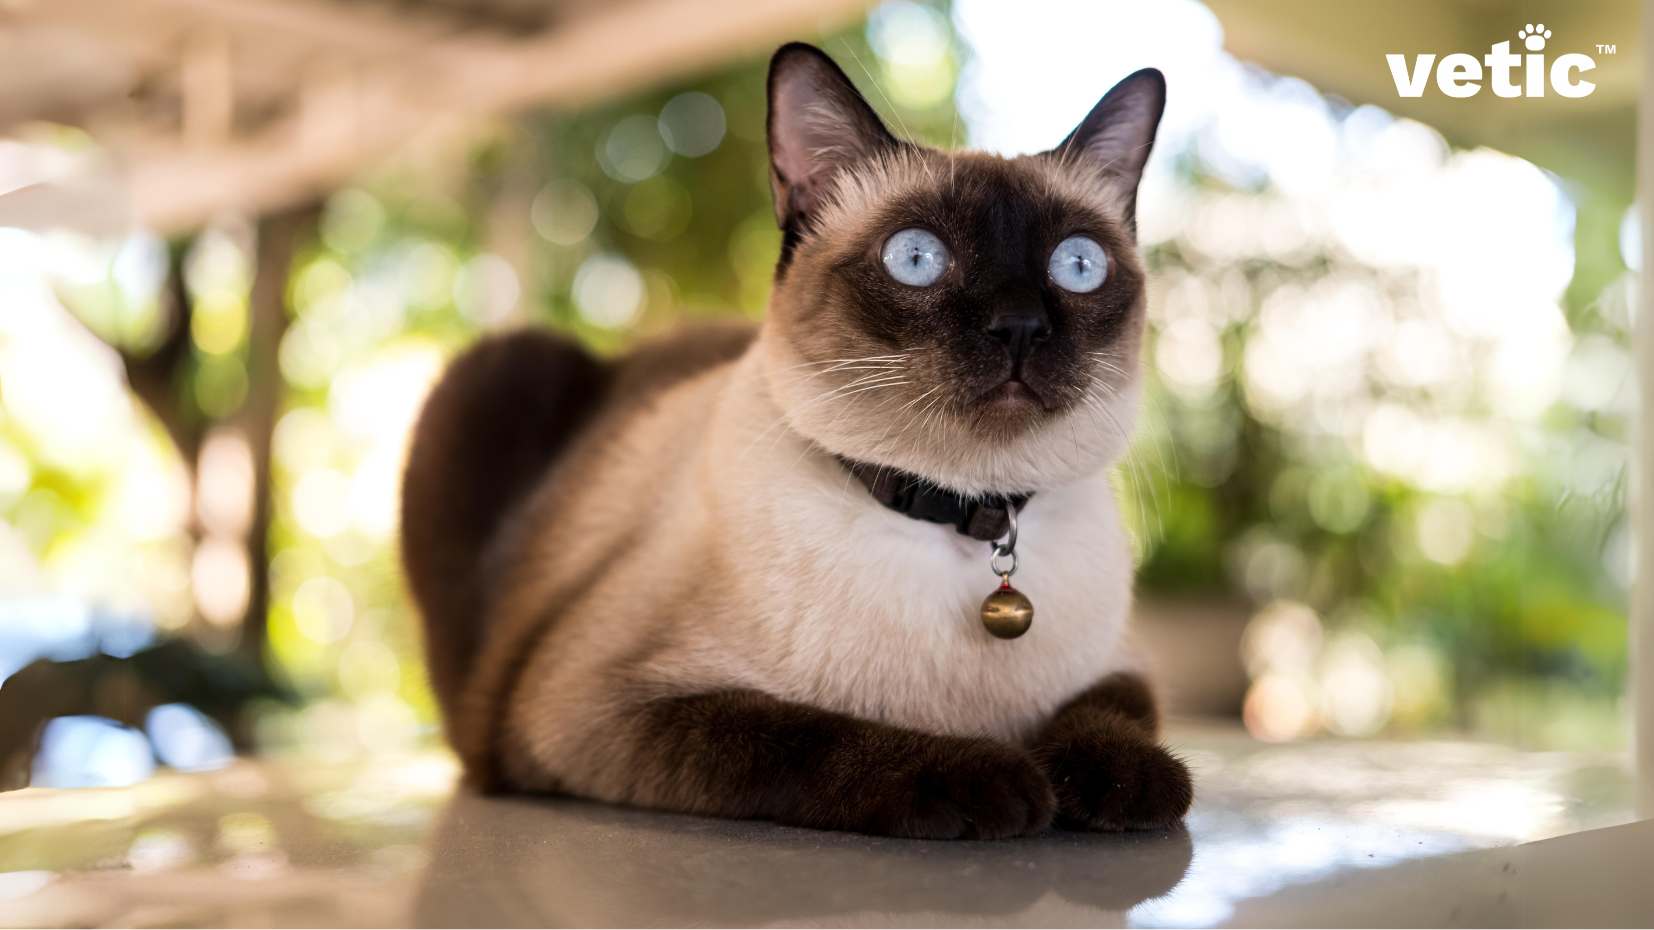 A bright blue eyed Siamese Cat sitting on the porch. A well lit garden like area is visible in the background. The Siamese cat has a black belt with a golden bell. They are sitting in a classic loaf posture. If you want to keep a Siamese Cat in India, you should keep them as complete indoor cats.